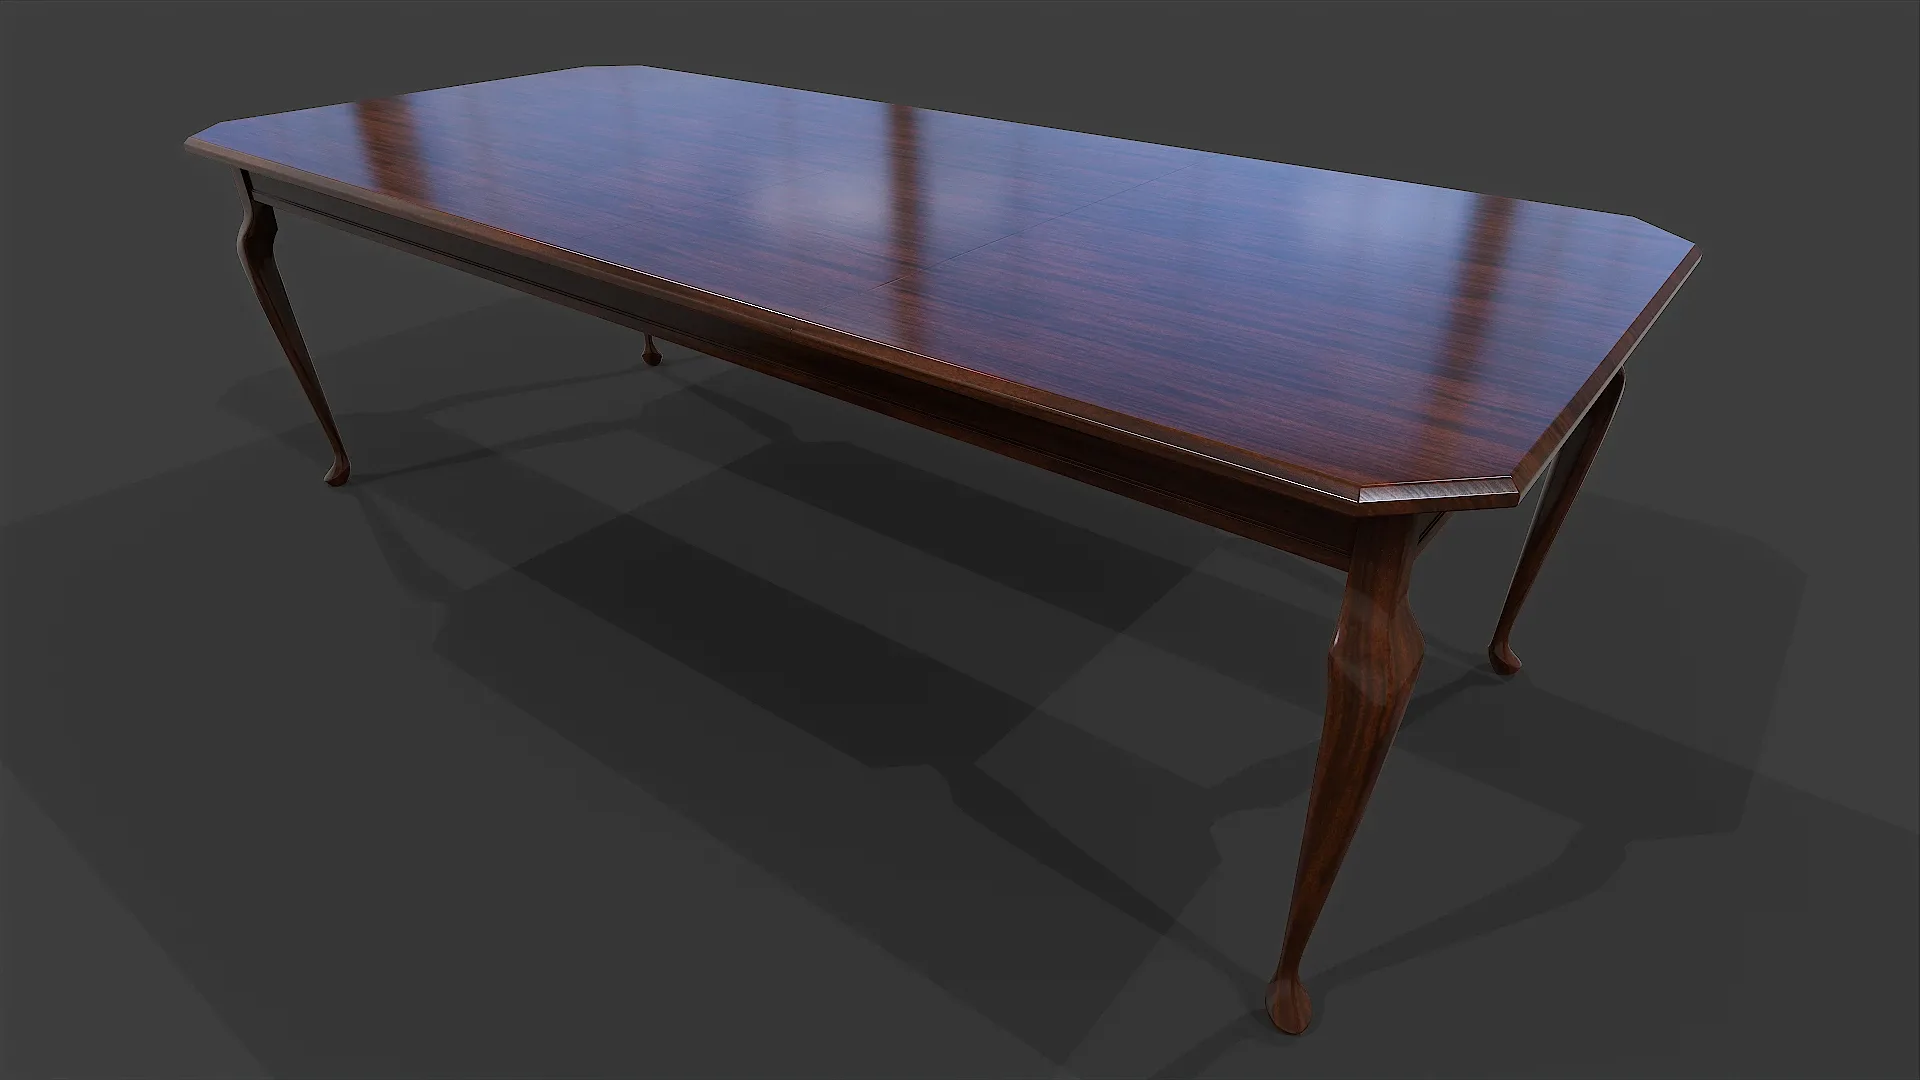 Dining Table - Low Poly